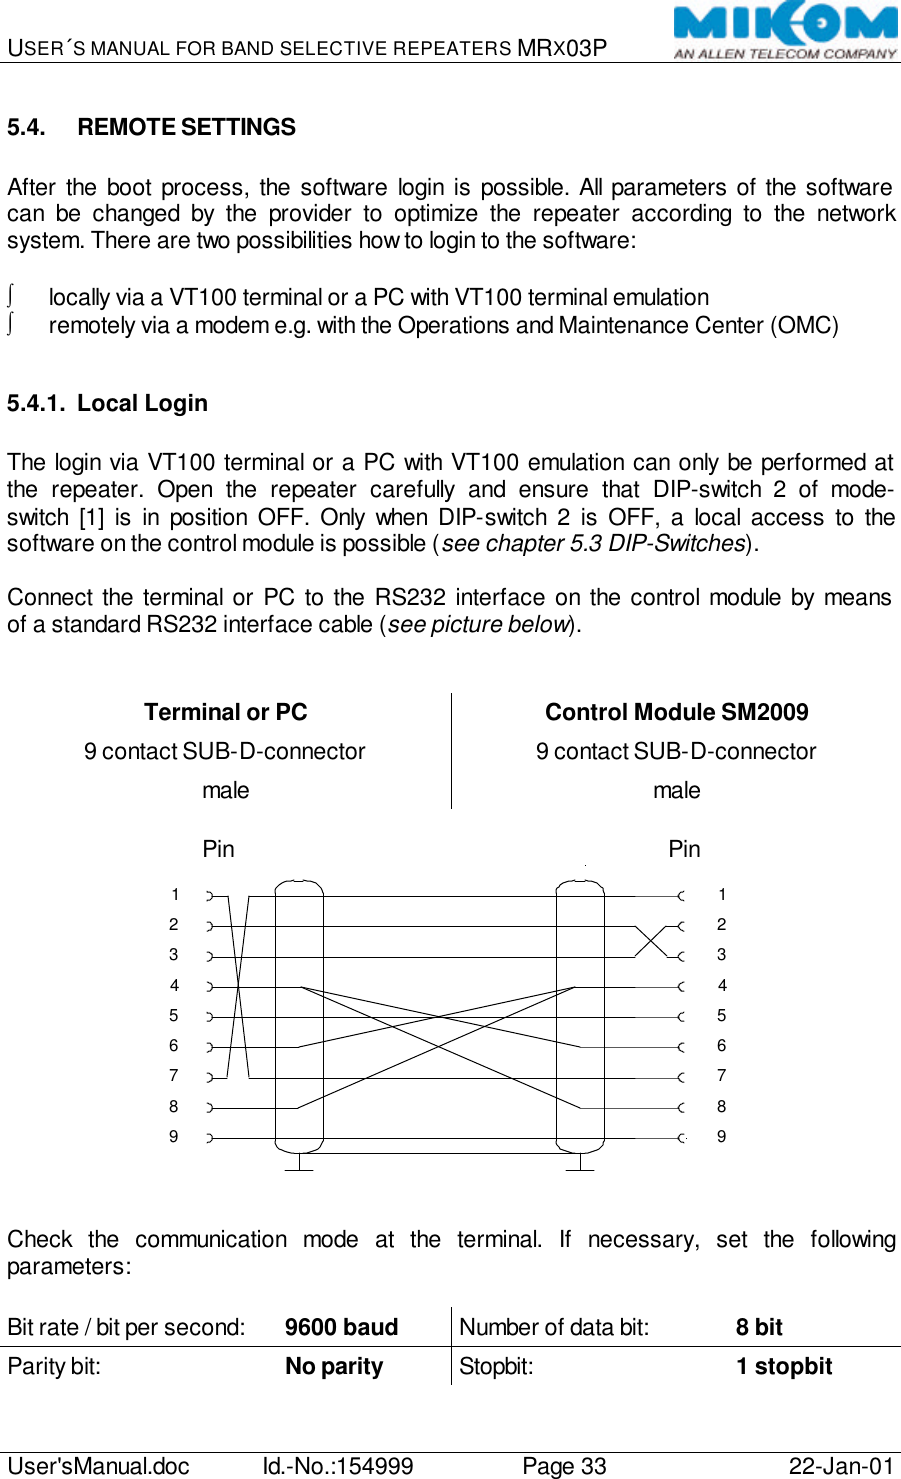 USER´S MANUAL FOR BAND SELECTIVE REPEATERS MRX03P   User&apos;sManual.doc Id.-No.:154999 Page 33 22-Jan-01  5.4. REMOTE SETTINGS  After the boot process, the software login is possible. All parameters of the software can be changed by the provider to optimize the repeater according to the network system. There are two possibilities how to login to the software:  ∫ locally via a VT100 terminal or a PC with VT100 terminal emulation ∫ remotely via a modem e.g. with the Operations and Maintenance Center (OMC)  5.4.1. Local Login  The login via VT100 terminal or a PC with VT100 emulation can only be performed at the repeater. Open the repeater carefully and ensure that DIP-switch 2 of mode-switch [1] is in position OFF. Only when DIP-switch 2 is OFF, a local access to the software on the control module is possible (see chapter 5.3 DIP-Switches).  Connect the terminal or PC to the RS232 interface on the control module by means of a standard RS232 interface cable (see picture below).   Terminal or PC Control Module SM2009 9 contact SUB-D-connector 9 contact SUB-D-connector male male  Pin                                                                             Pin 123456789897613452   Check the communication mode at the terminal. If necessary, set the following parameters:  Bit rate / bit per second: 9600 baud Number of data bit:    8 bit Parity bit:      No parity Stopbit:   1 stopbit  